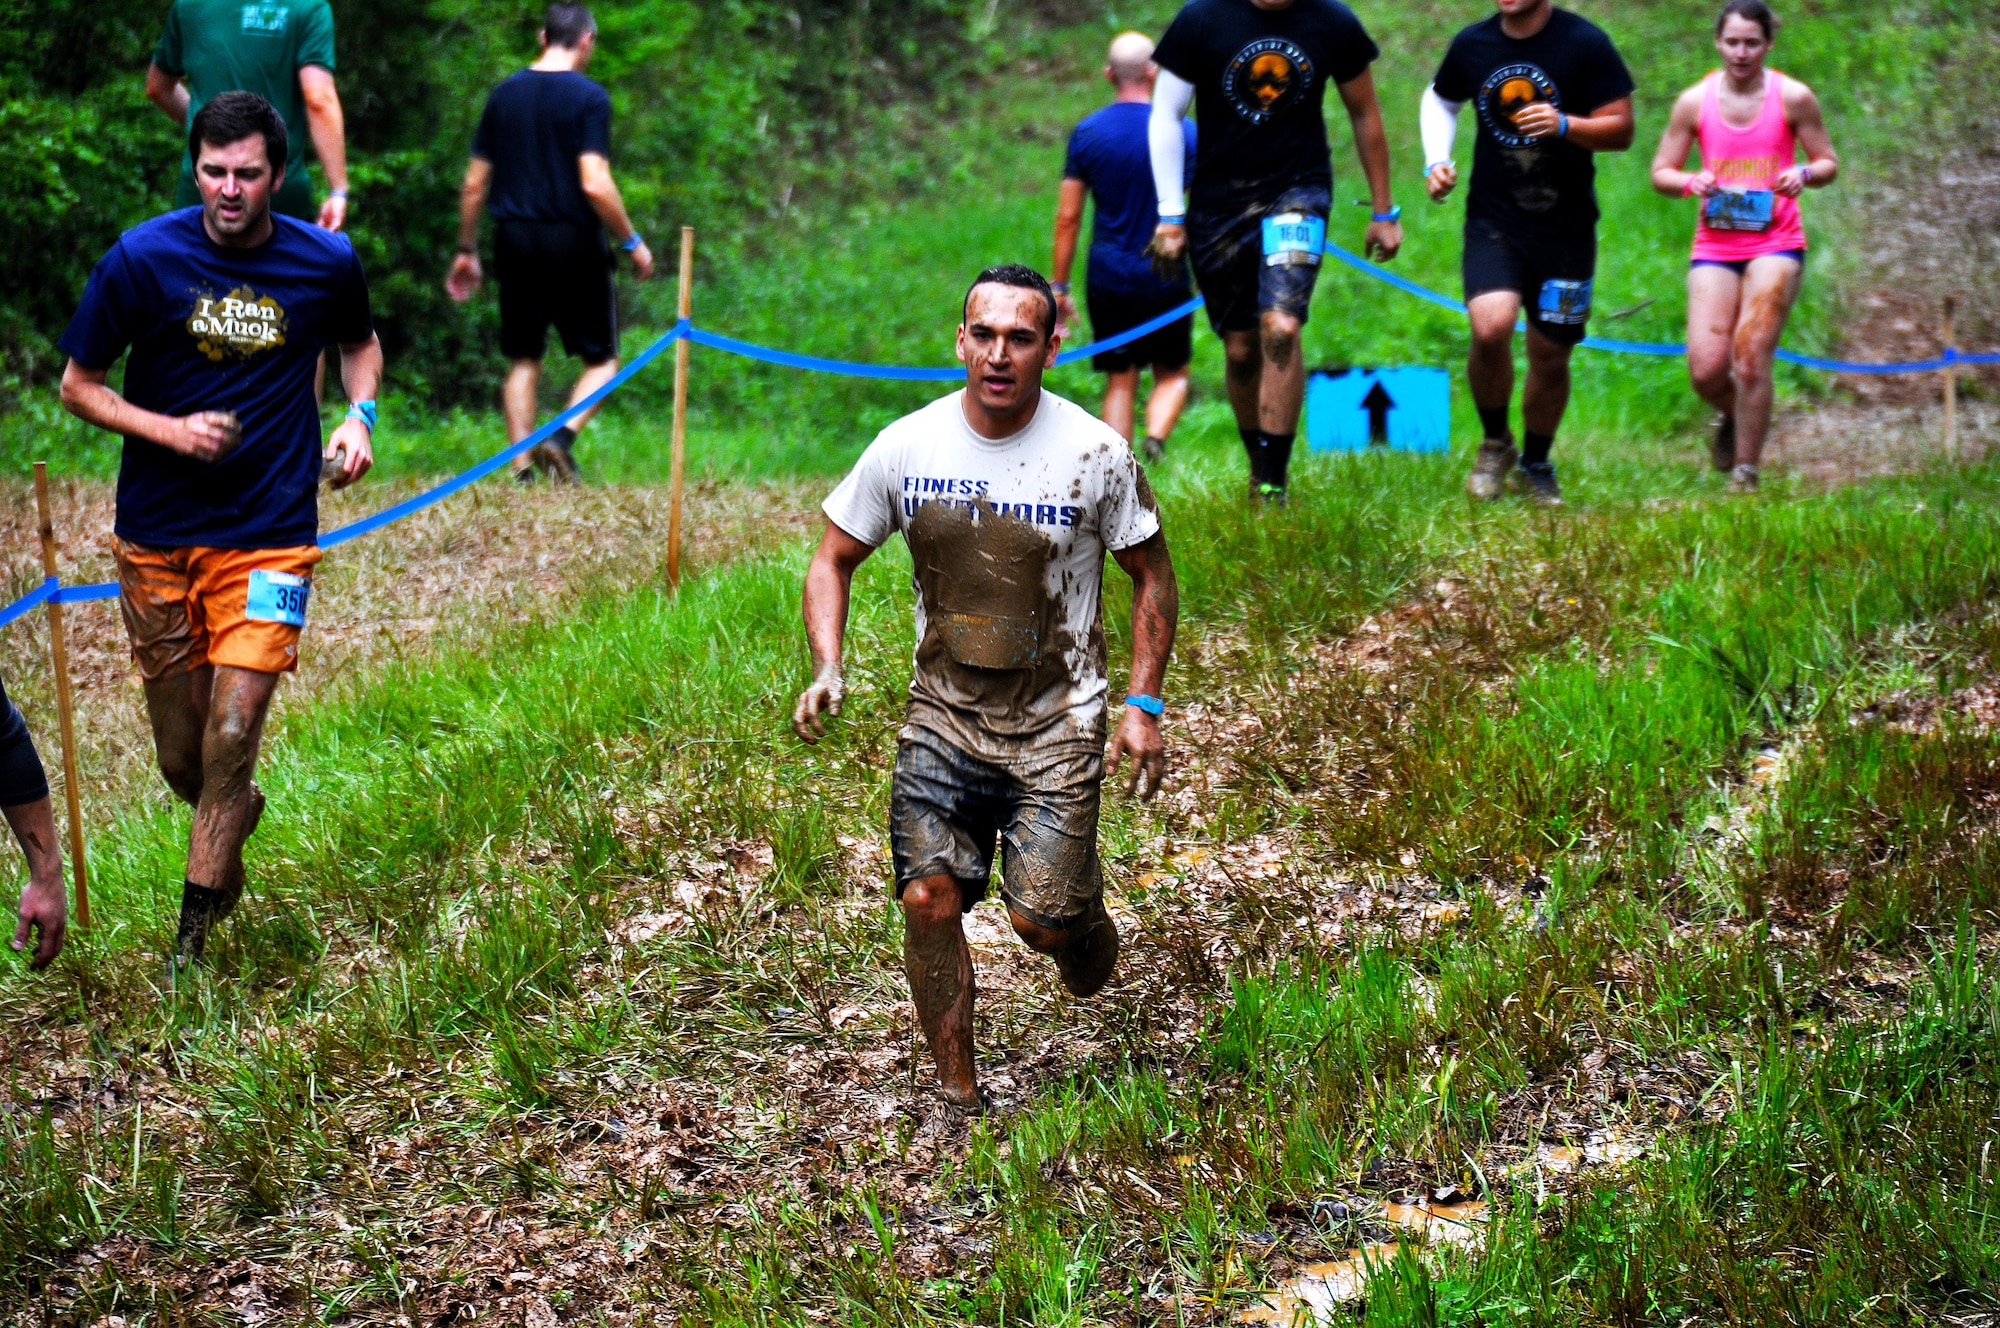 Tech. Sgt. Randy Estrella, 94th Logistics Readiness Squadron vehicle maintainer, races down a muddy hill during the Georgia Spring 2015 Savage Race in Dallas, Ga., April 18, 2015. The Savage Race is an Air Force Reserve sponsored obstacle course that challenges participants in more than 20 different trials over the course of five miles. (U.S. Air Force photo/Senior Airman Daniel Phelps)